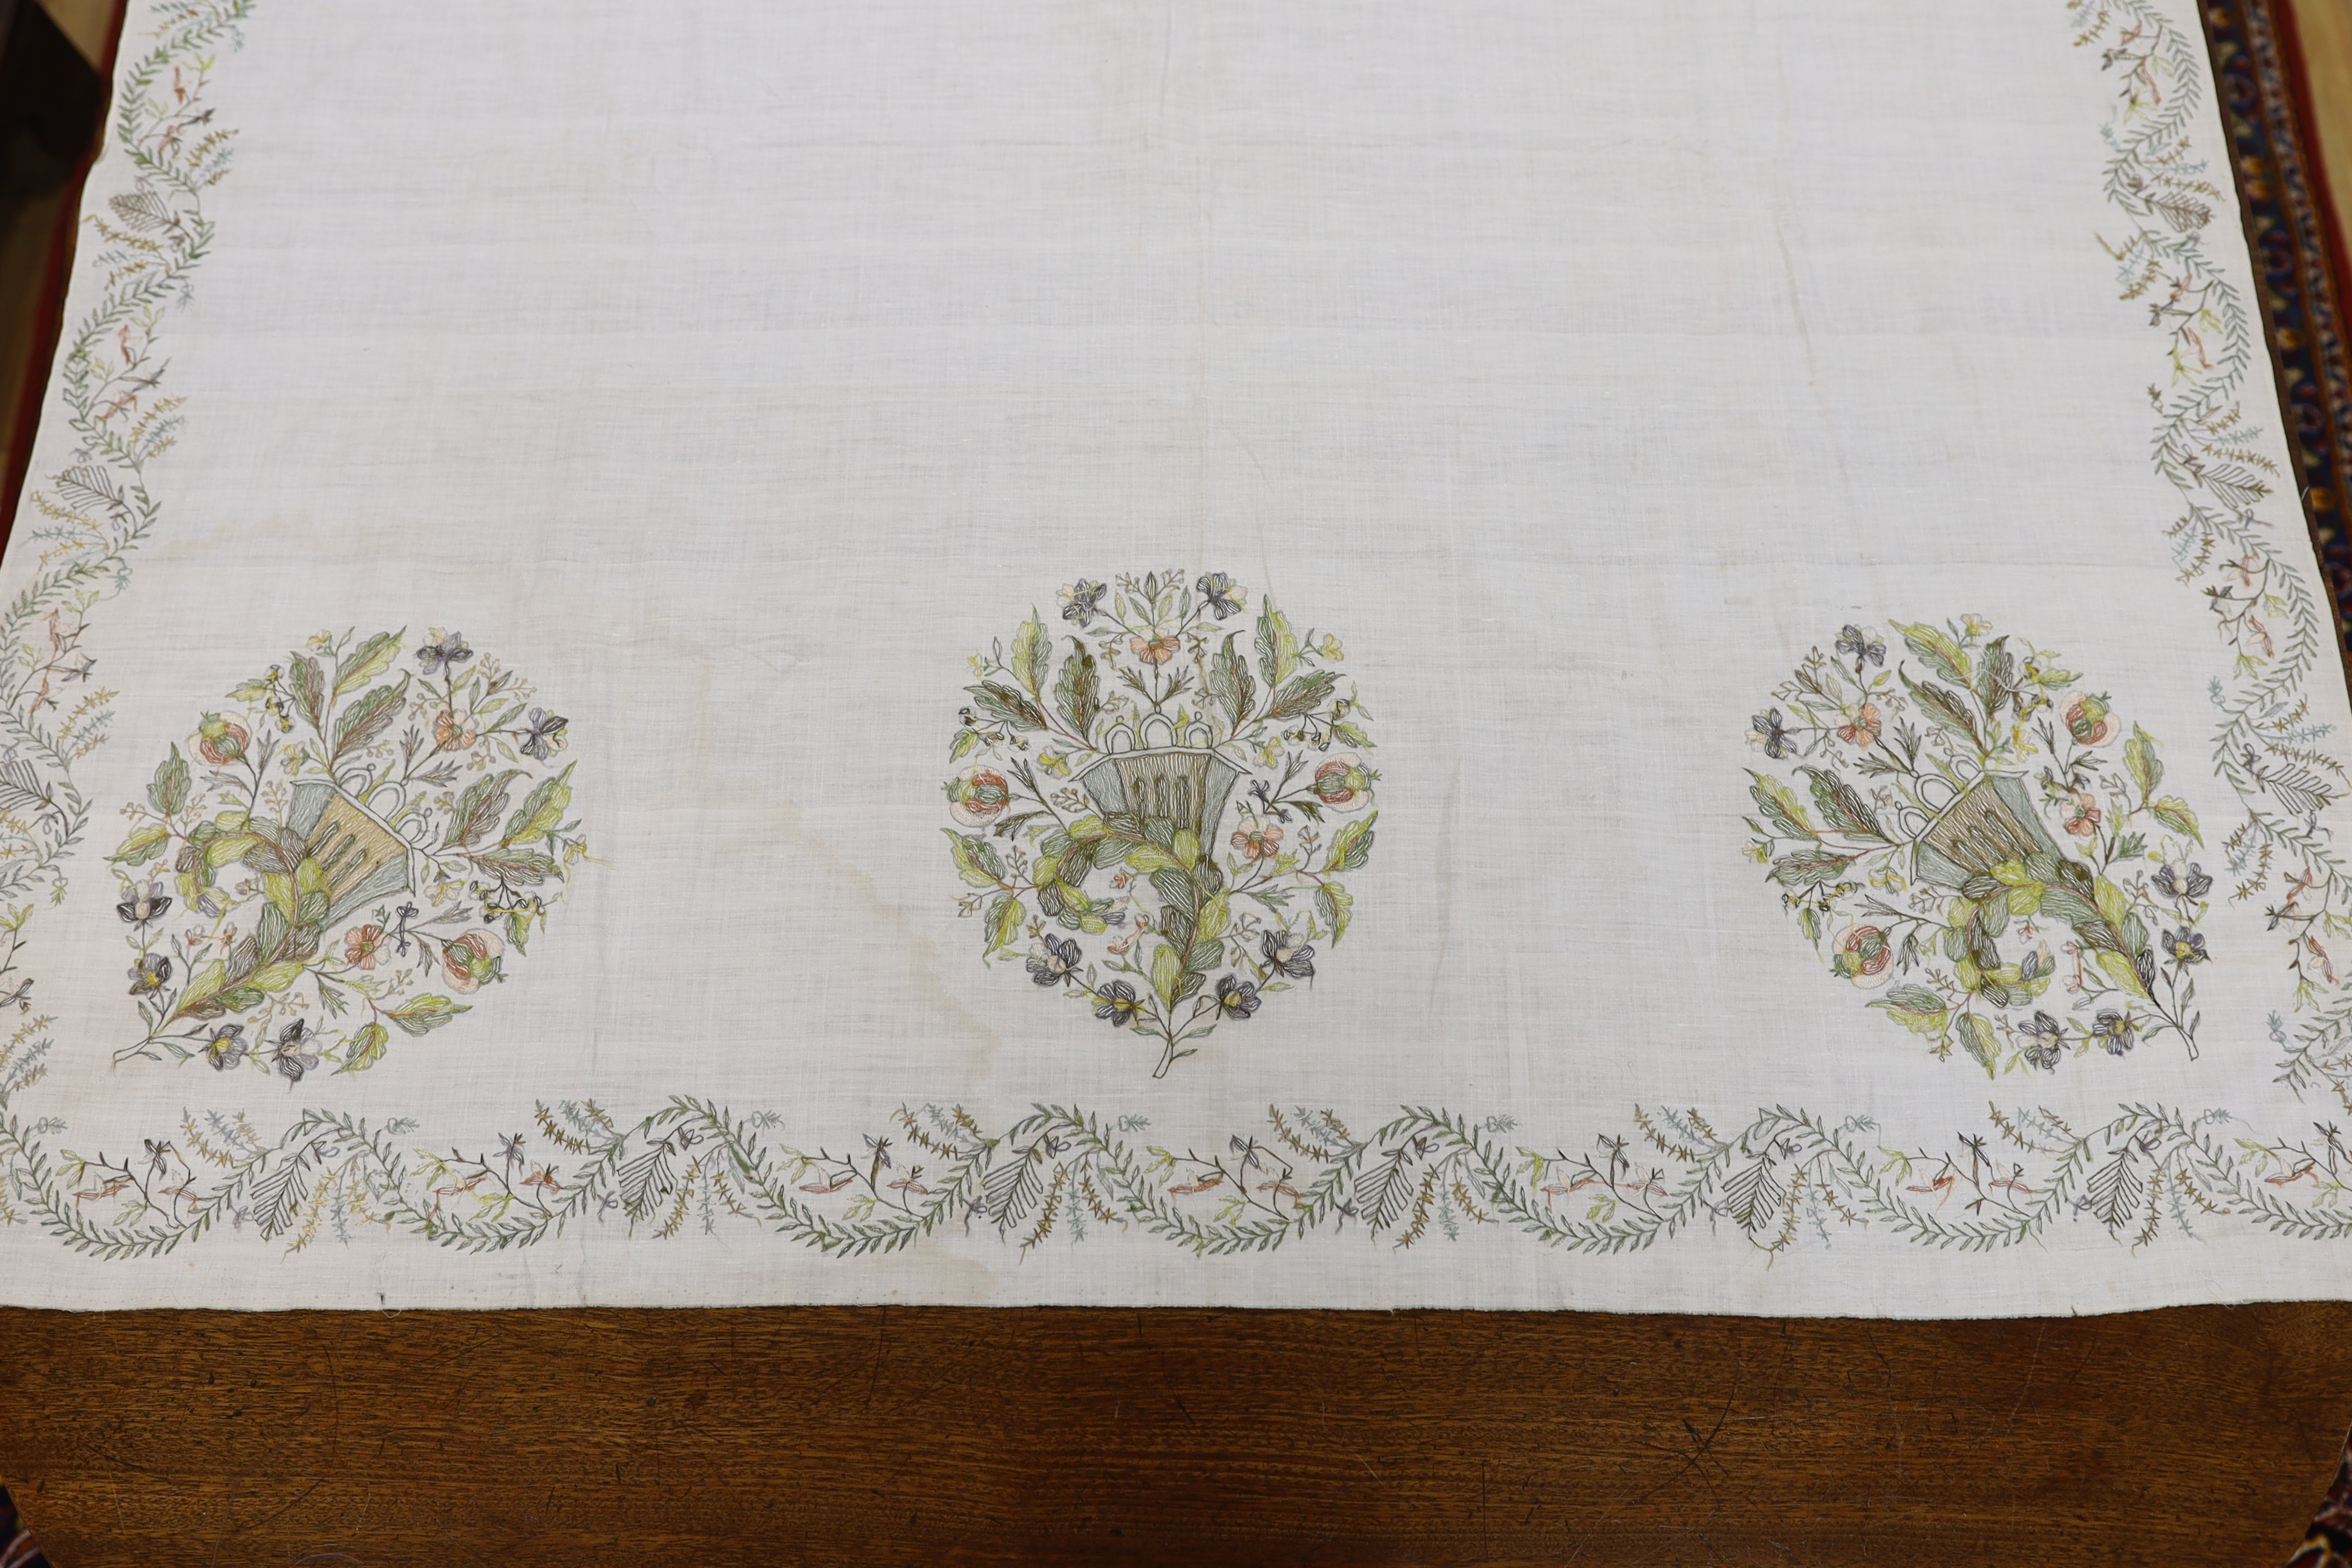 A late 18th-19th century fine linen chain stitched floral embroidered panel, possibly Kashmiri, using traditional design elements and embroidery similar from earlier embroideries of this kind worked on narrower looms, 22